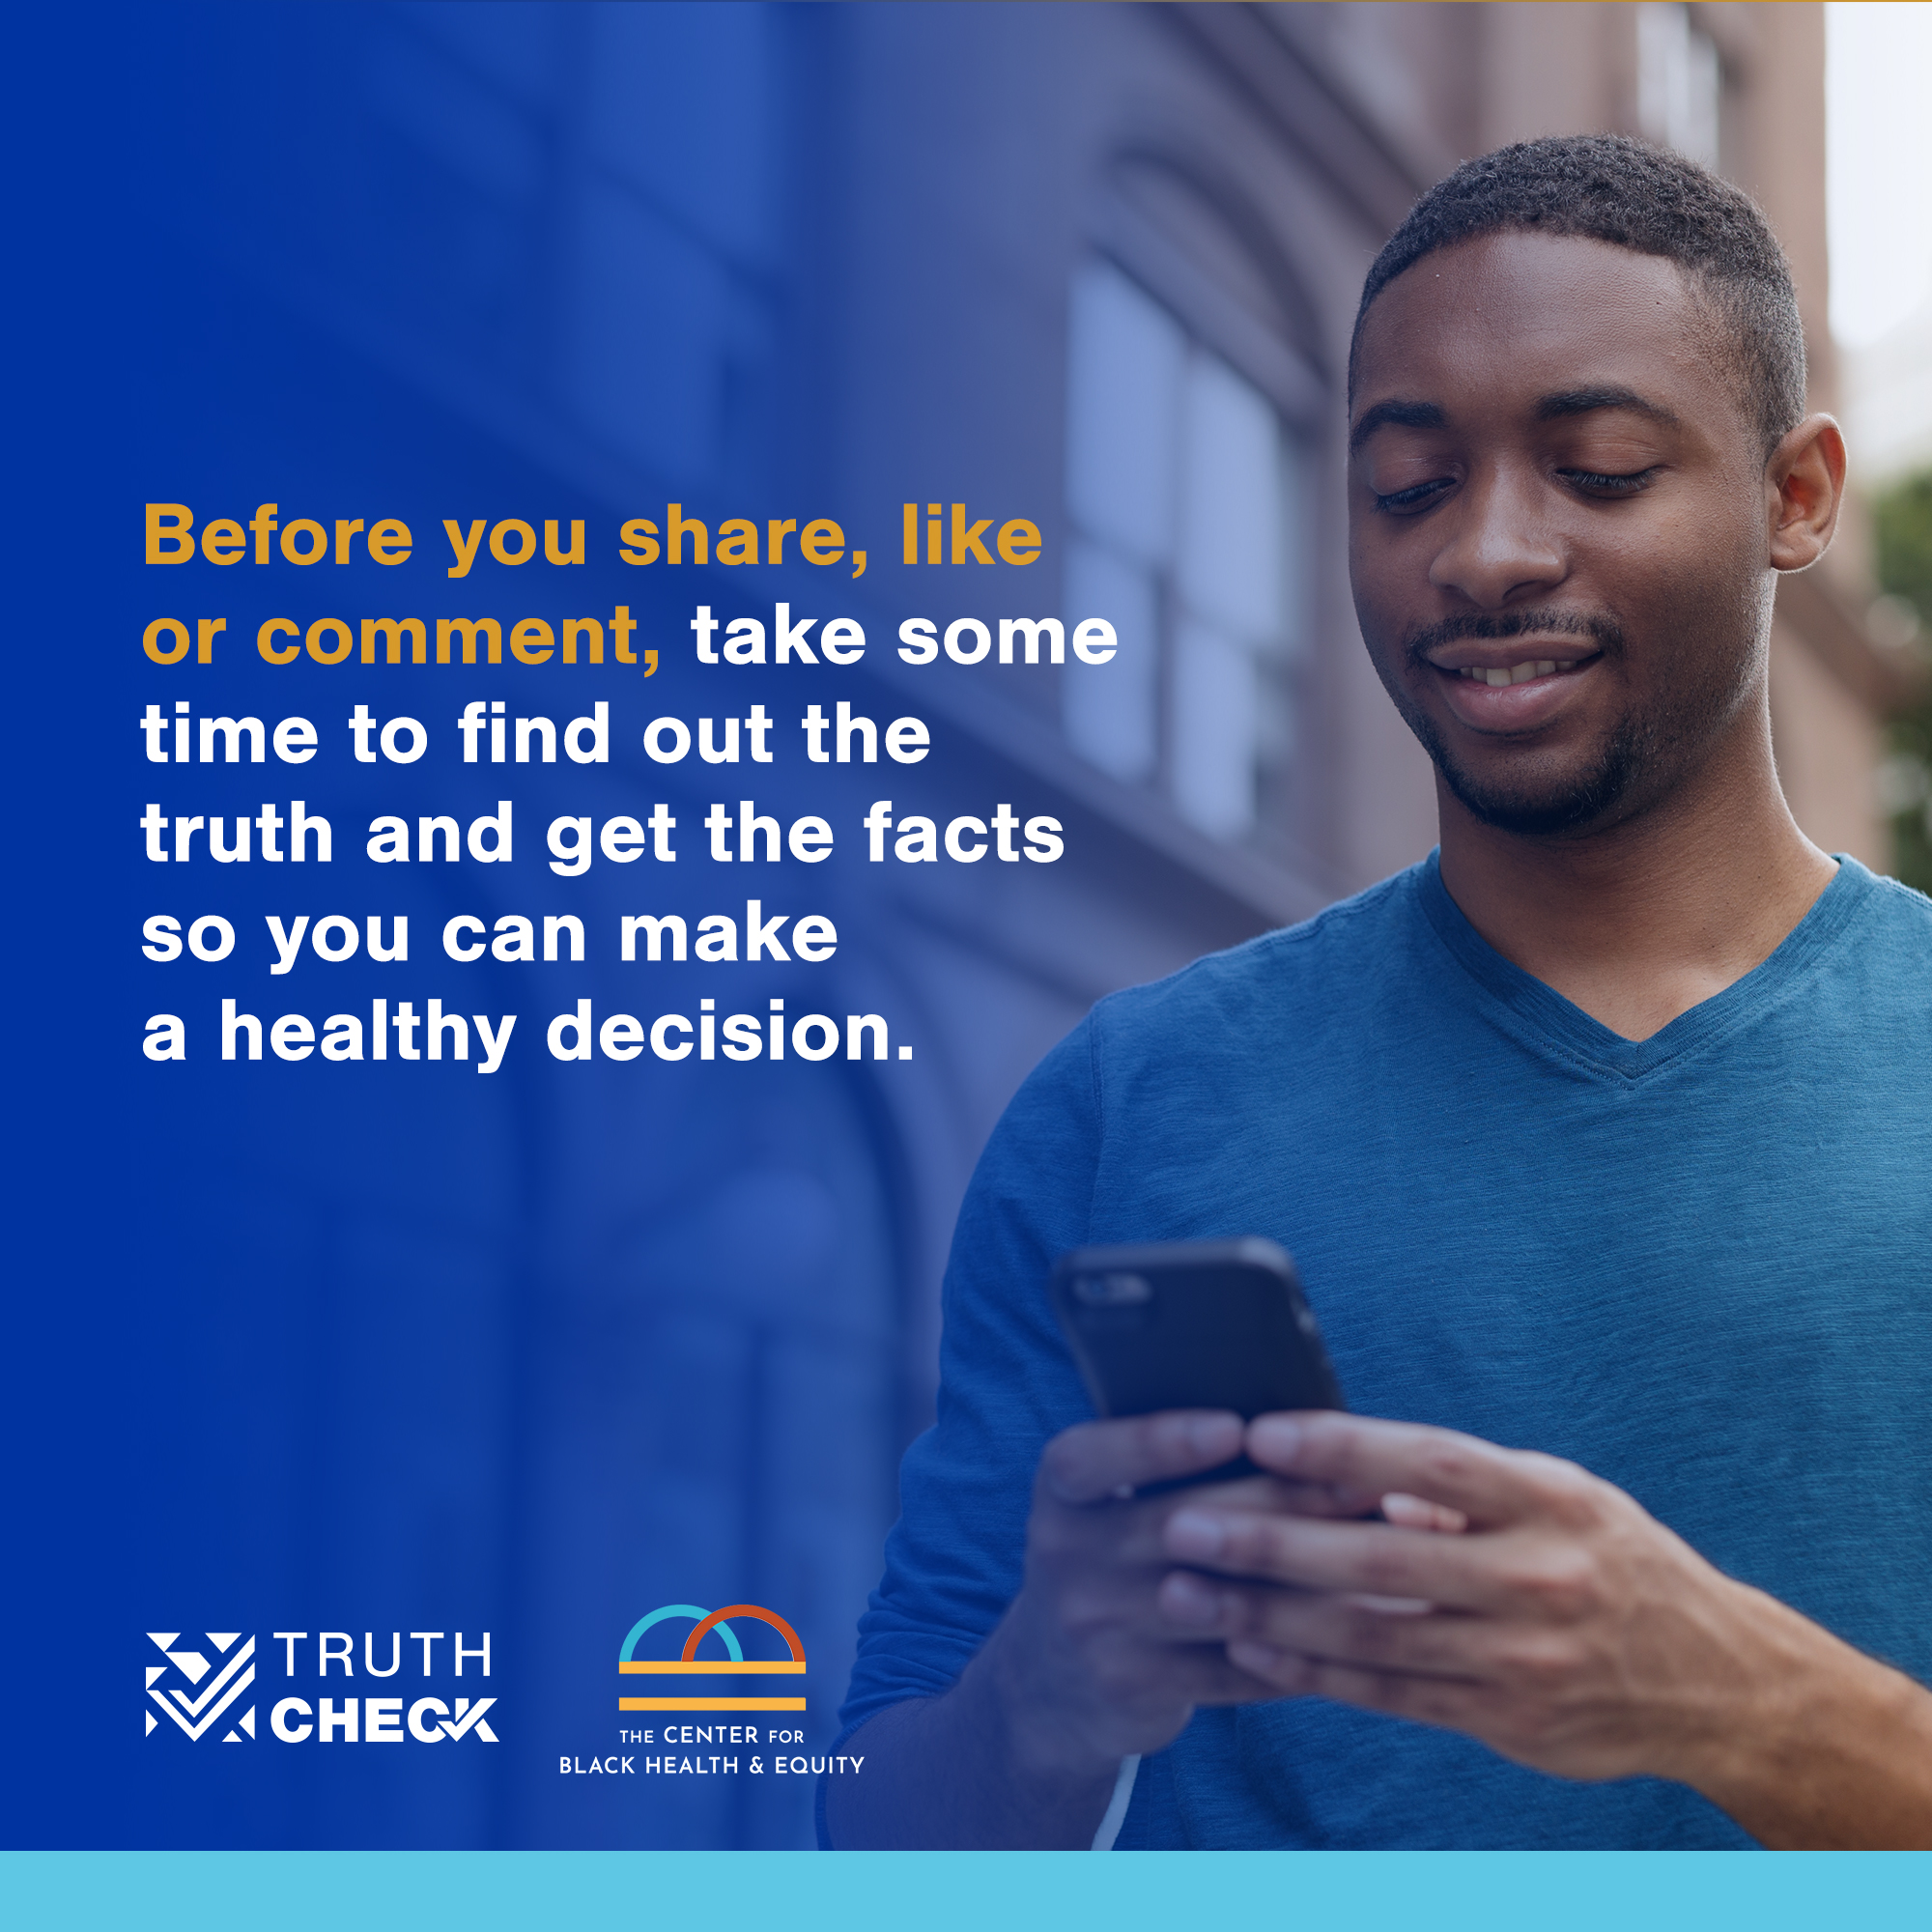 Truth Check social graphic for Instagram with Black man